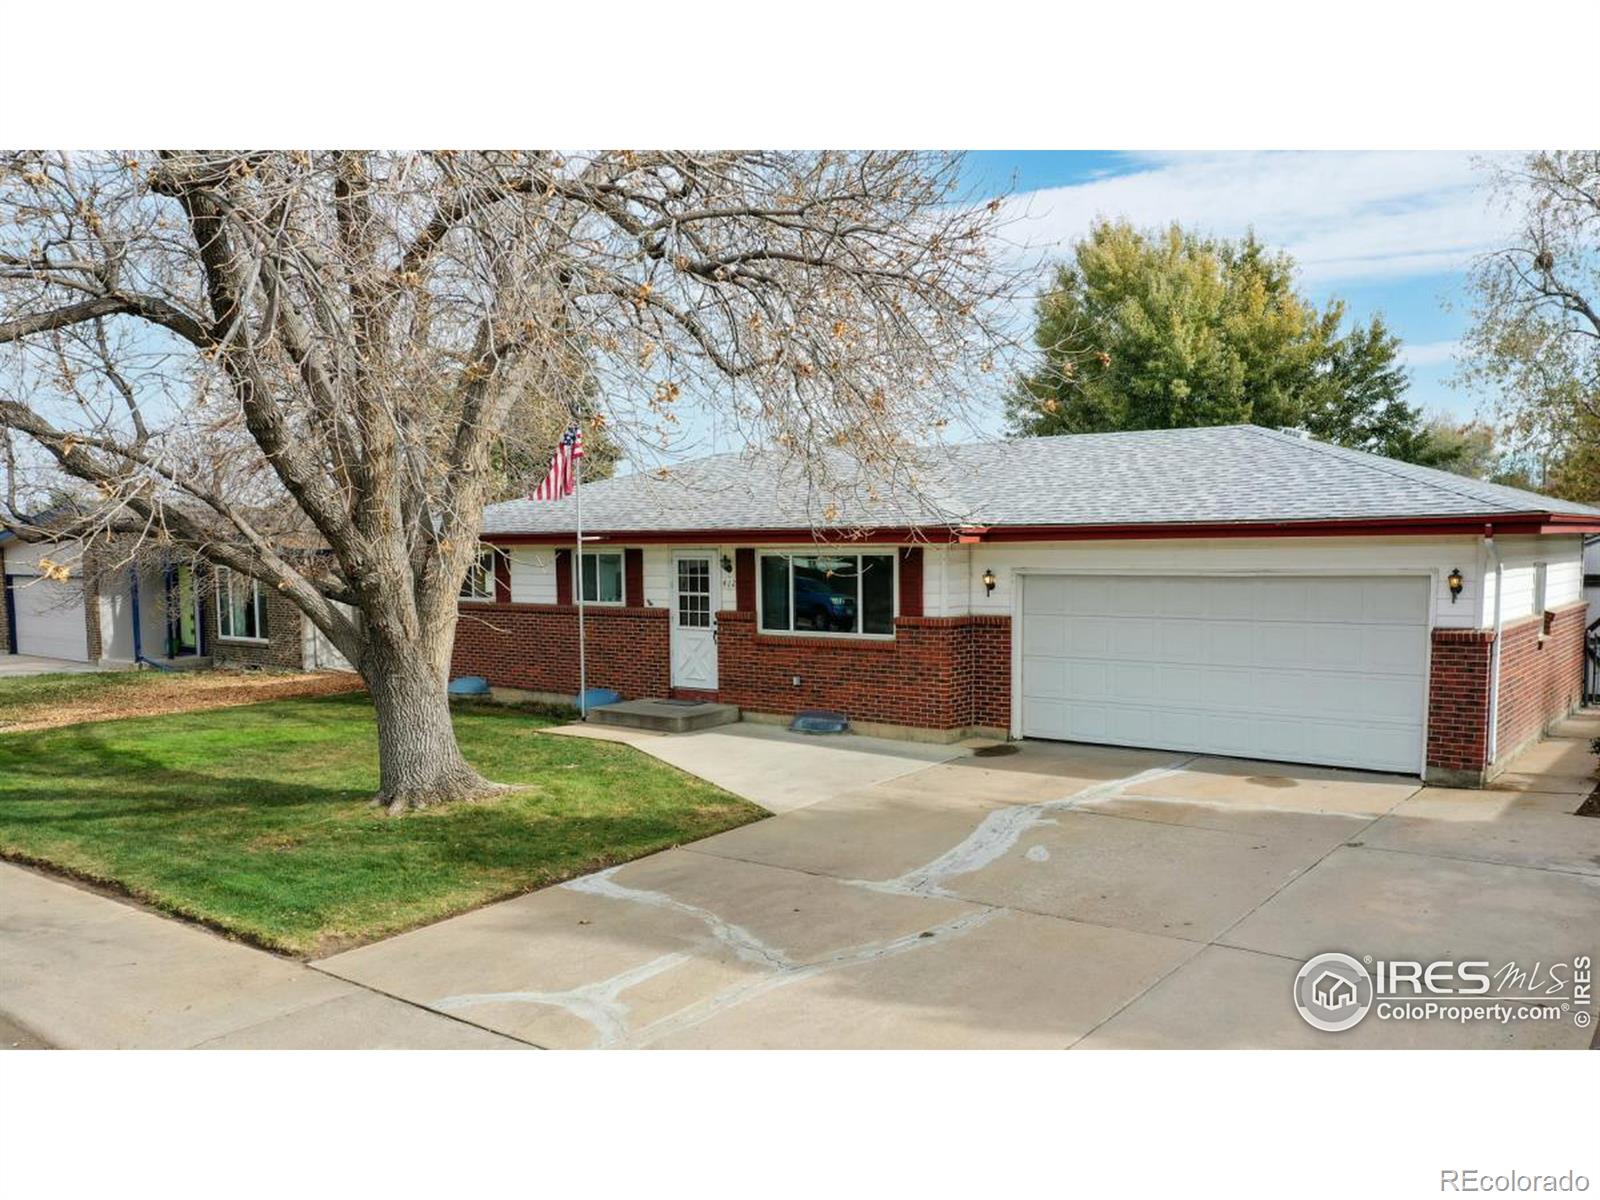 412  36th Ave Ct, greeley MLS: 456789999118 Beds: 4 Baths: 2 Price: $383,000